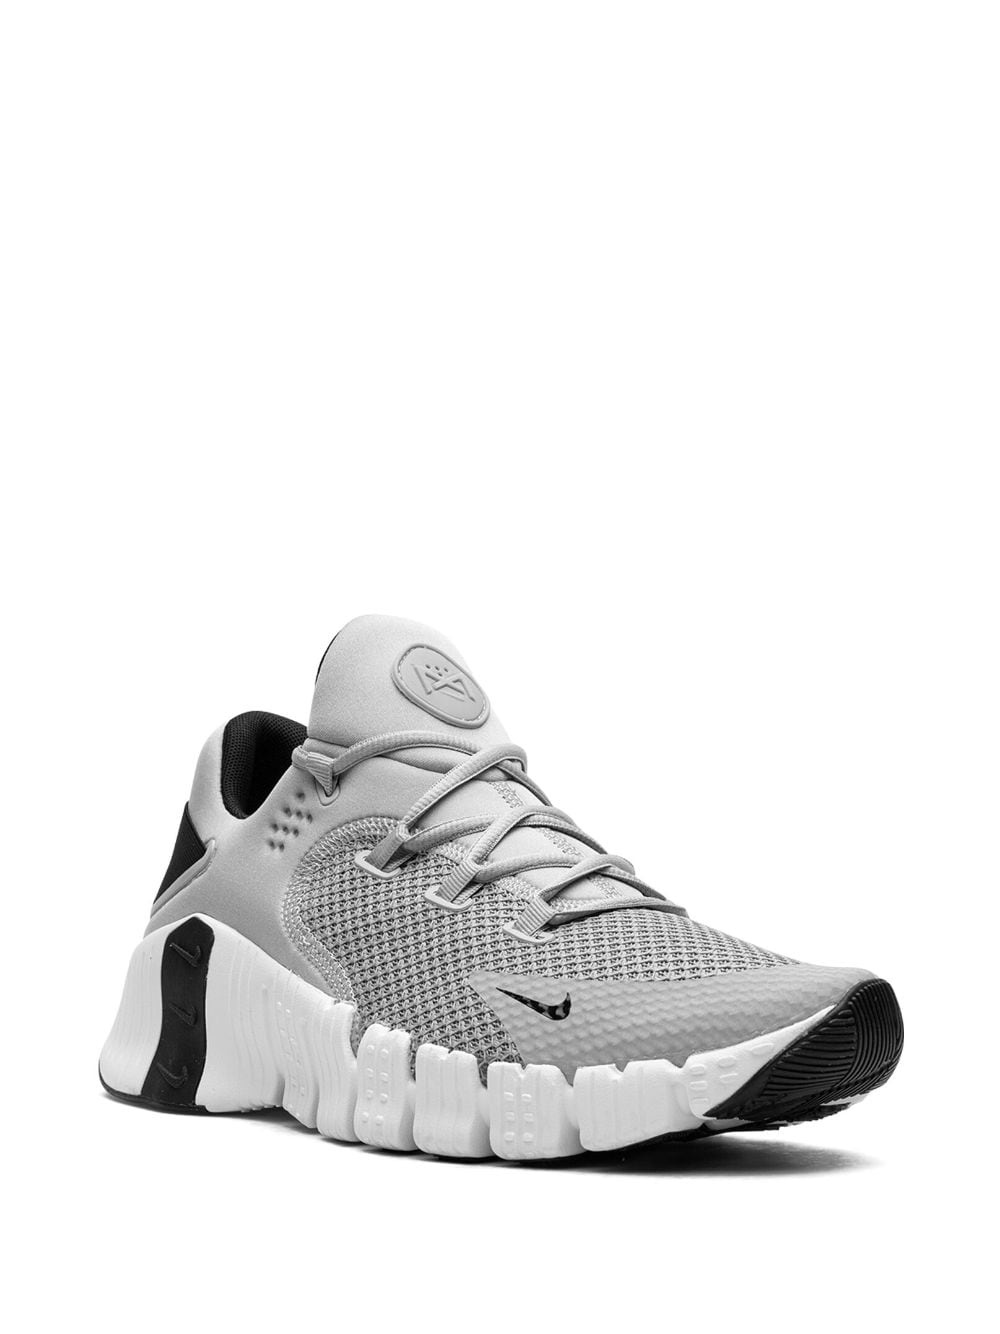 Free Metcon 4 "Wolf Grey" sneakers - 2